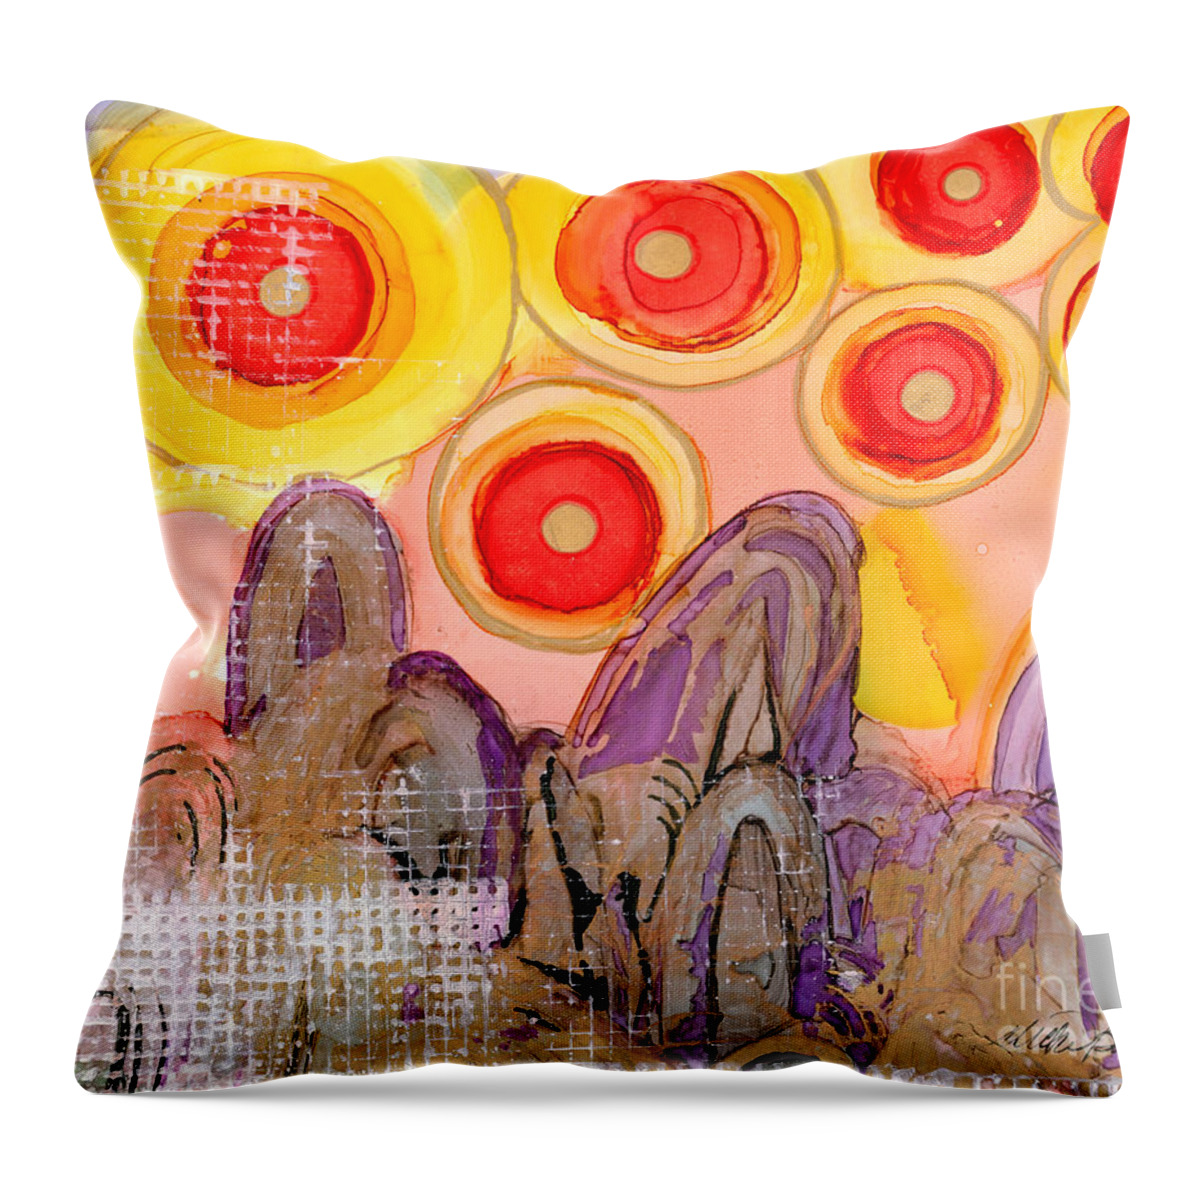 Abstract Throw Pillow featuring the painting Seven Suns by Vicki Baun Barry